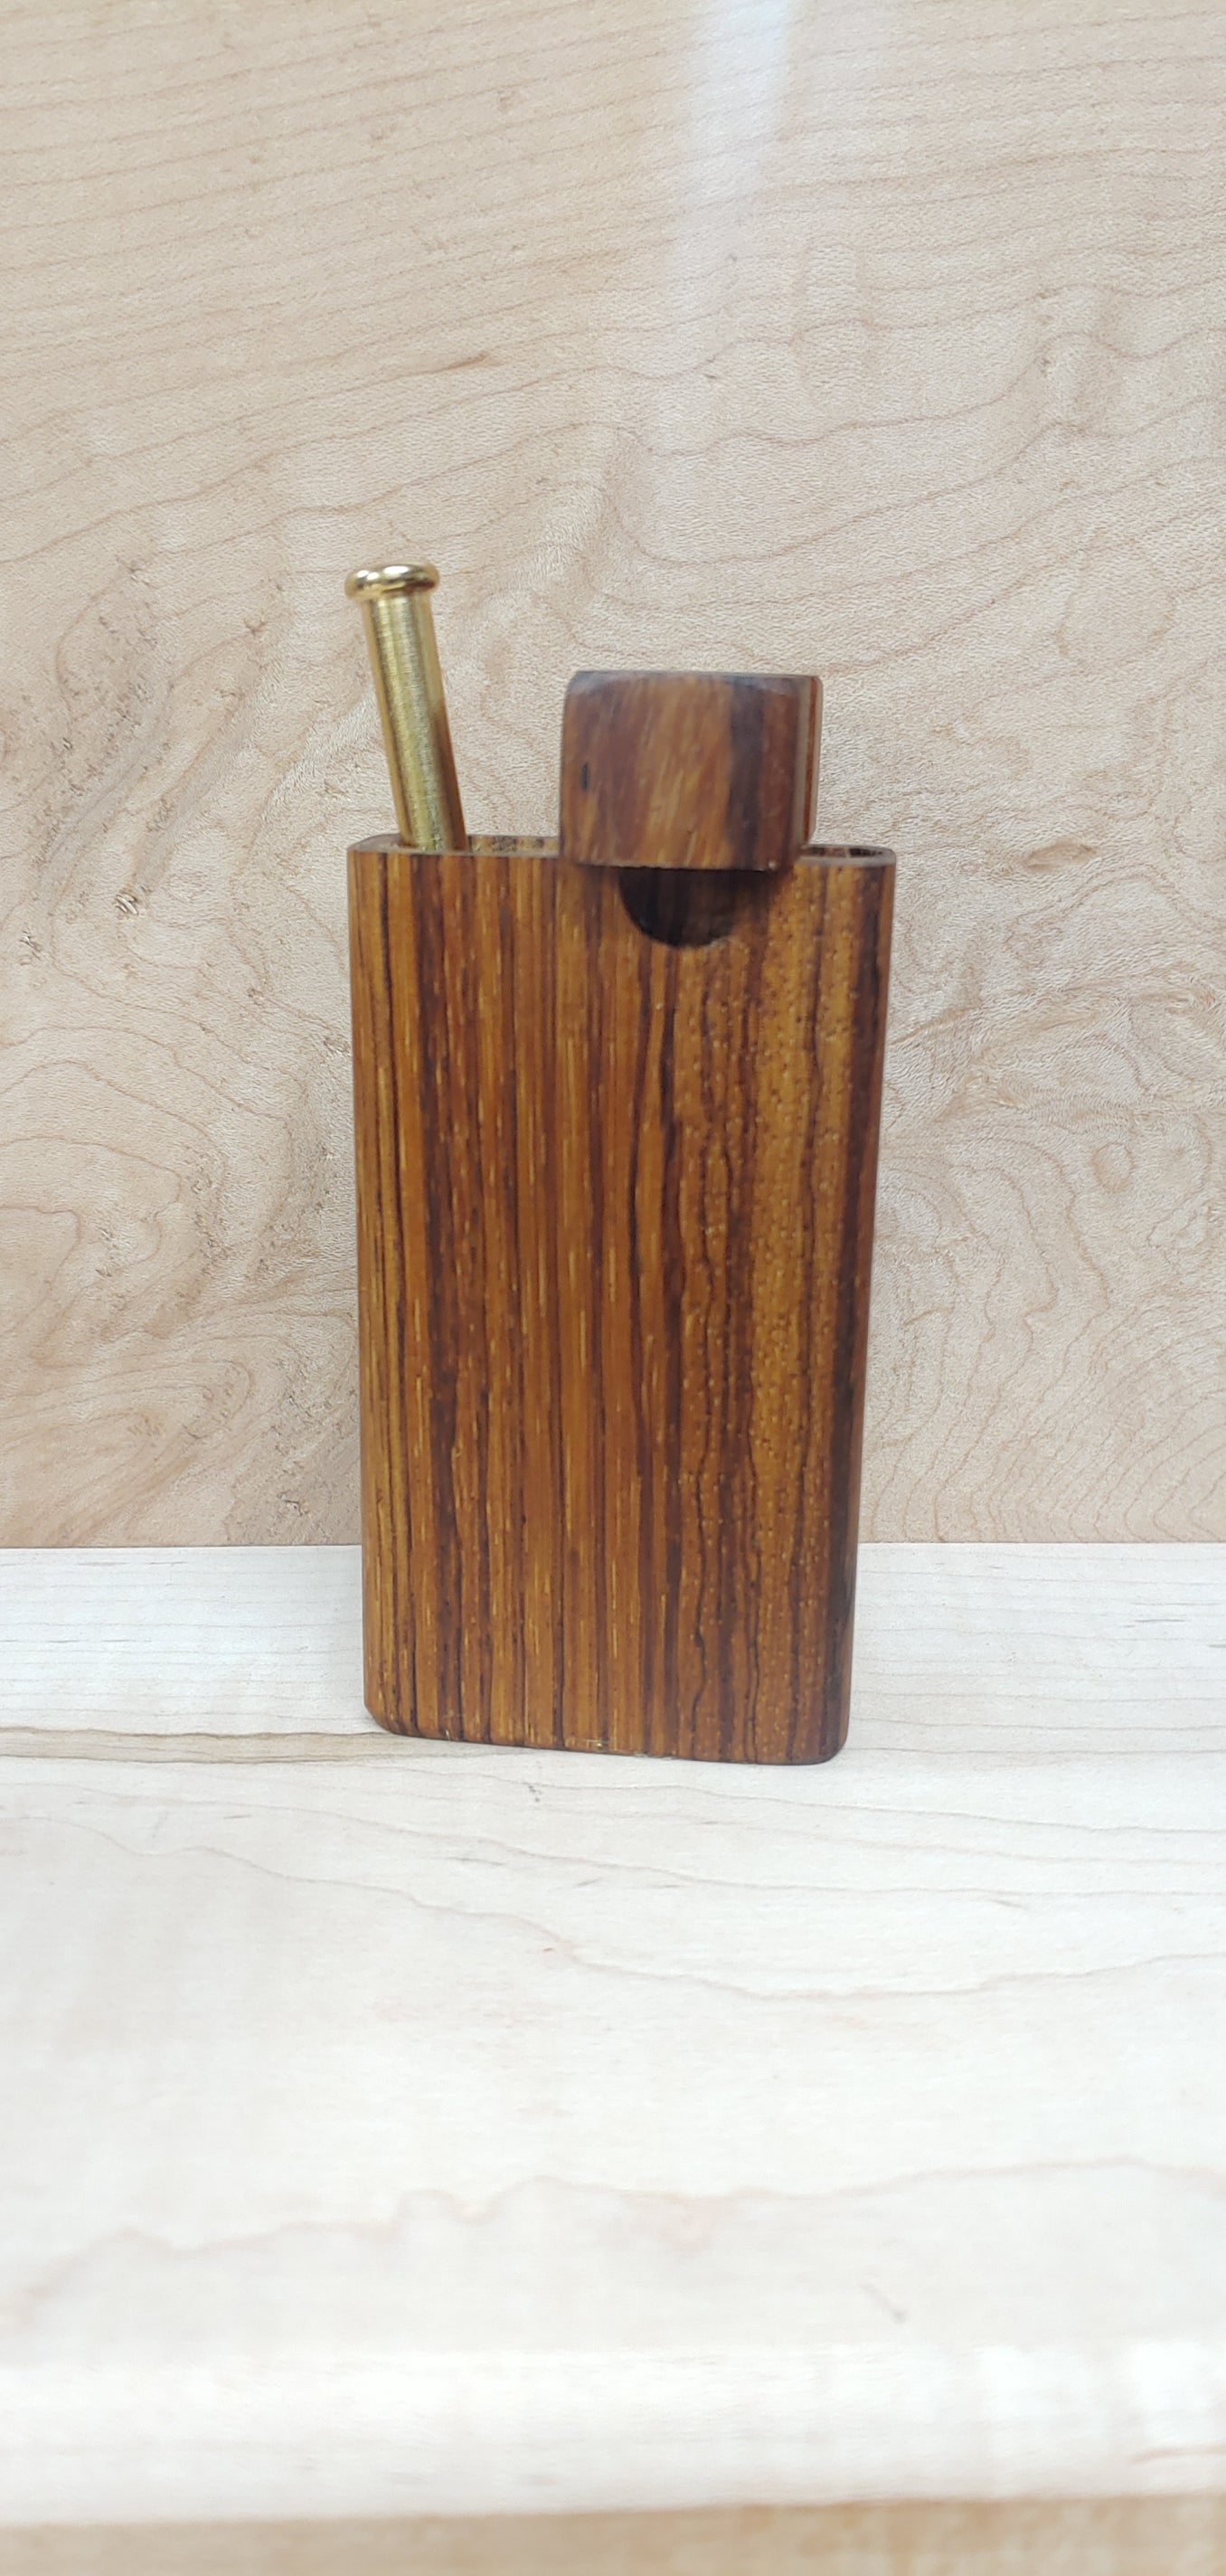 The Woody Zebrawood Dugout with OG Brass Bat One Hit | Brass One Hitter Dugout | Wood Twist Top Brass One Hit | Zebra Wood